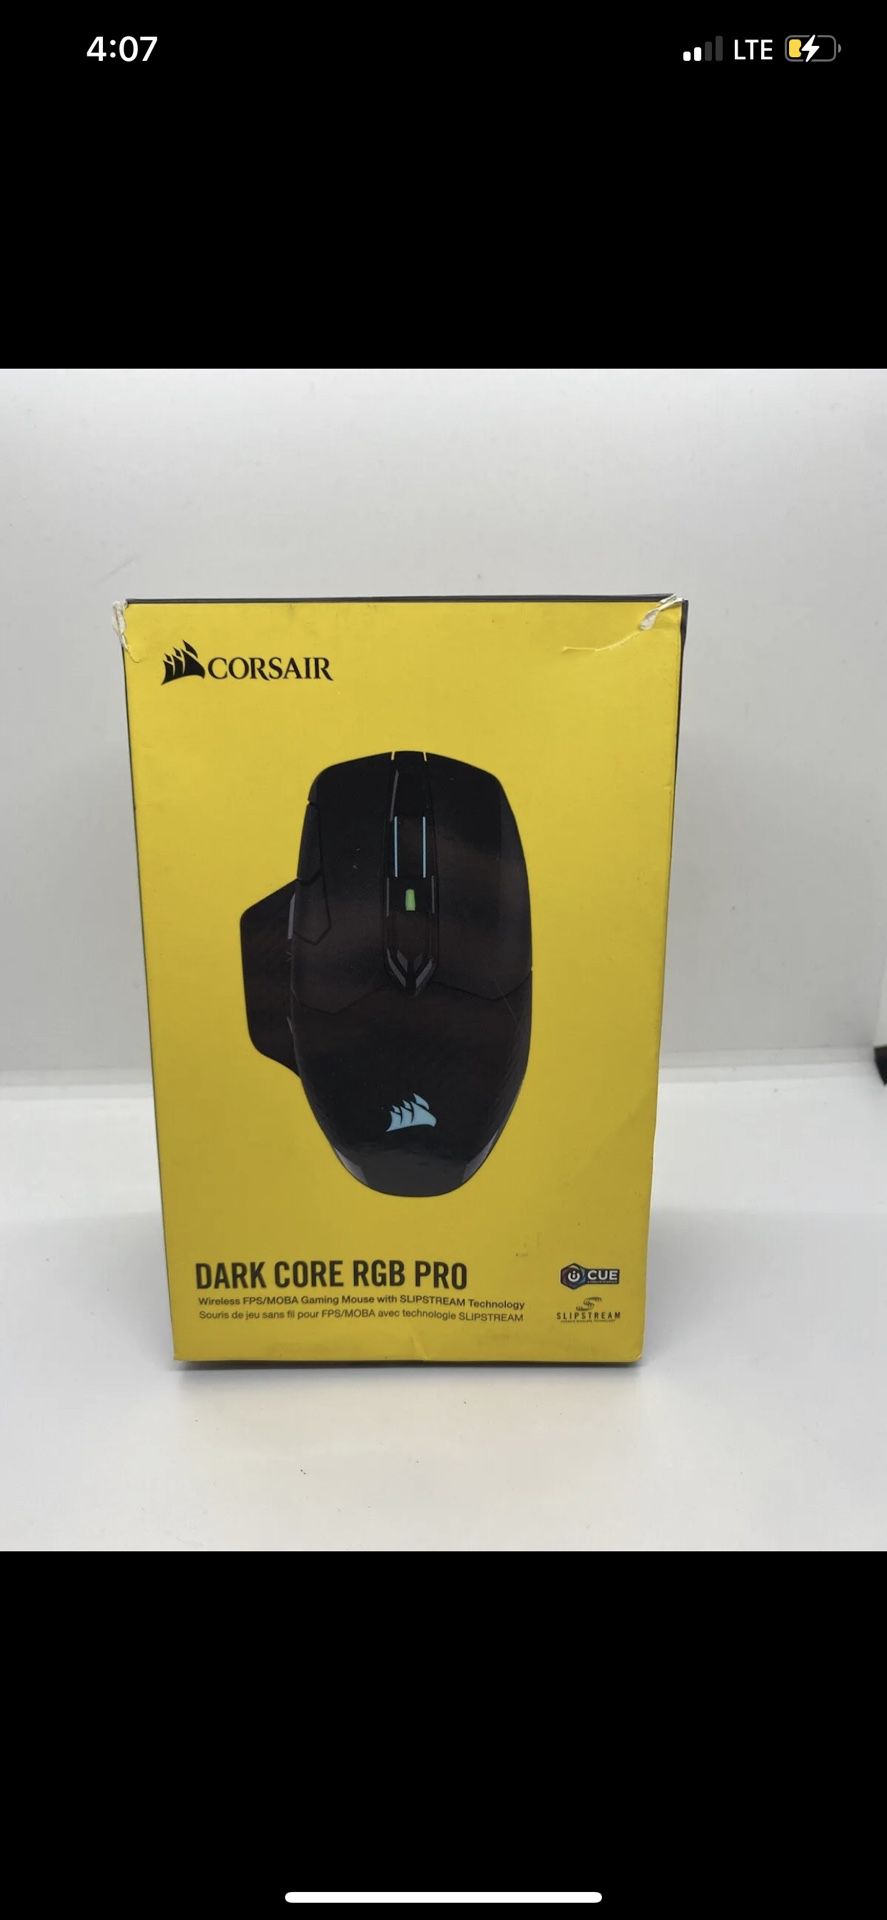 Corsair Dark Core RGB Pro Wireless Gaming Mouse With Slipstream Technology New